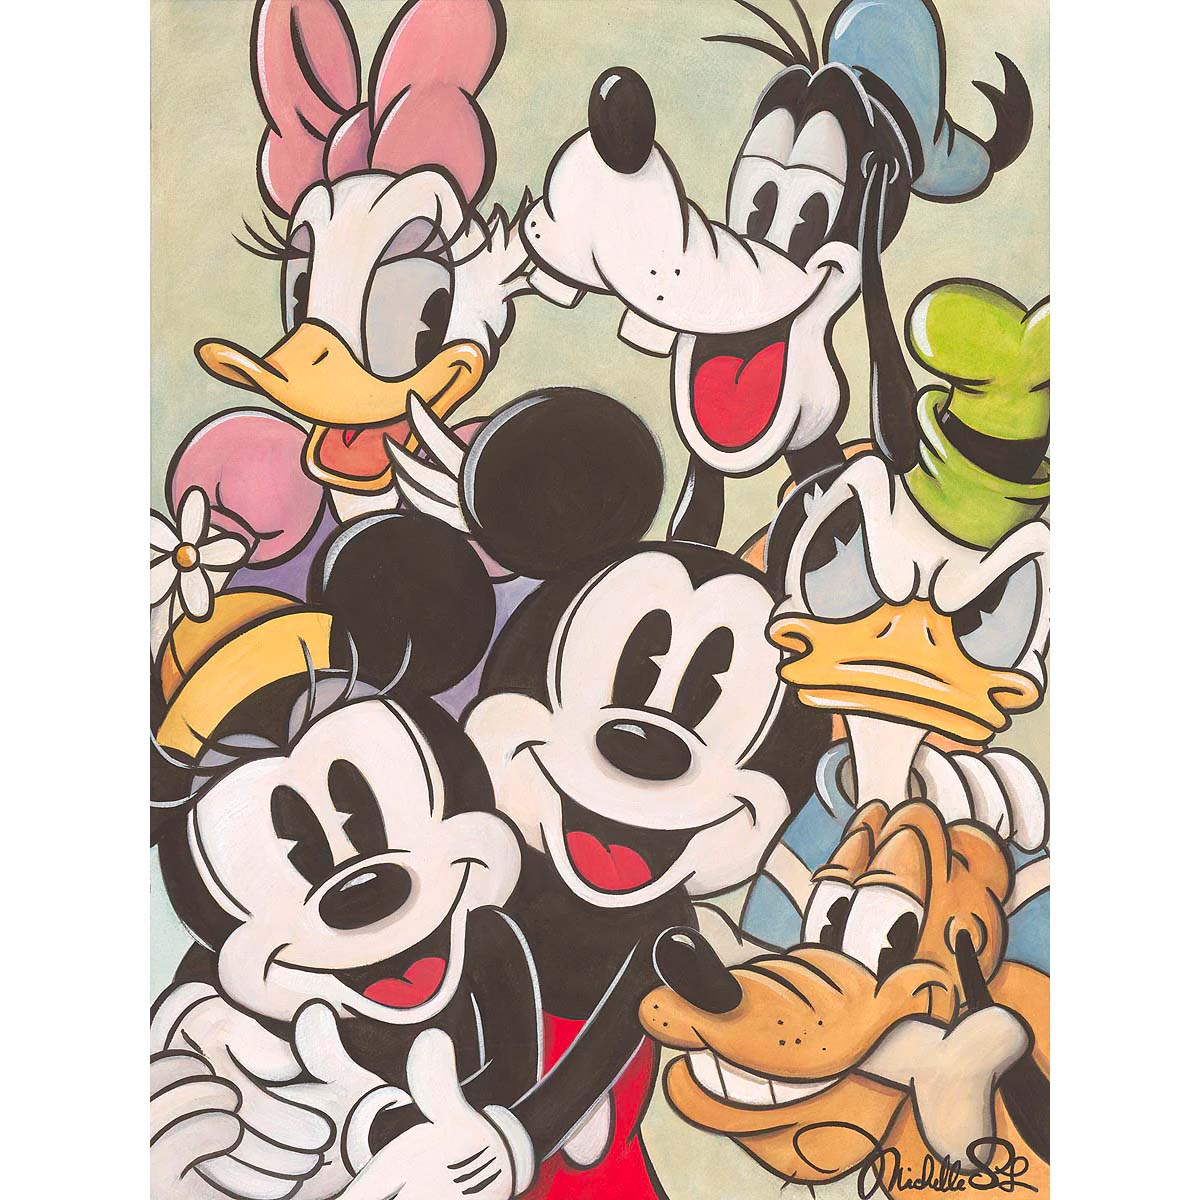 Michelle St. Laurent Disney "The Fabulous Six!" Limited Edition Canvas Giclee